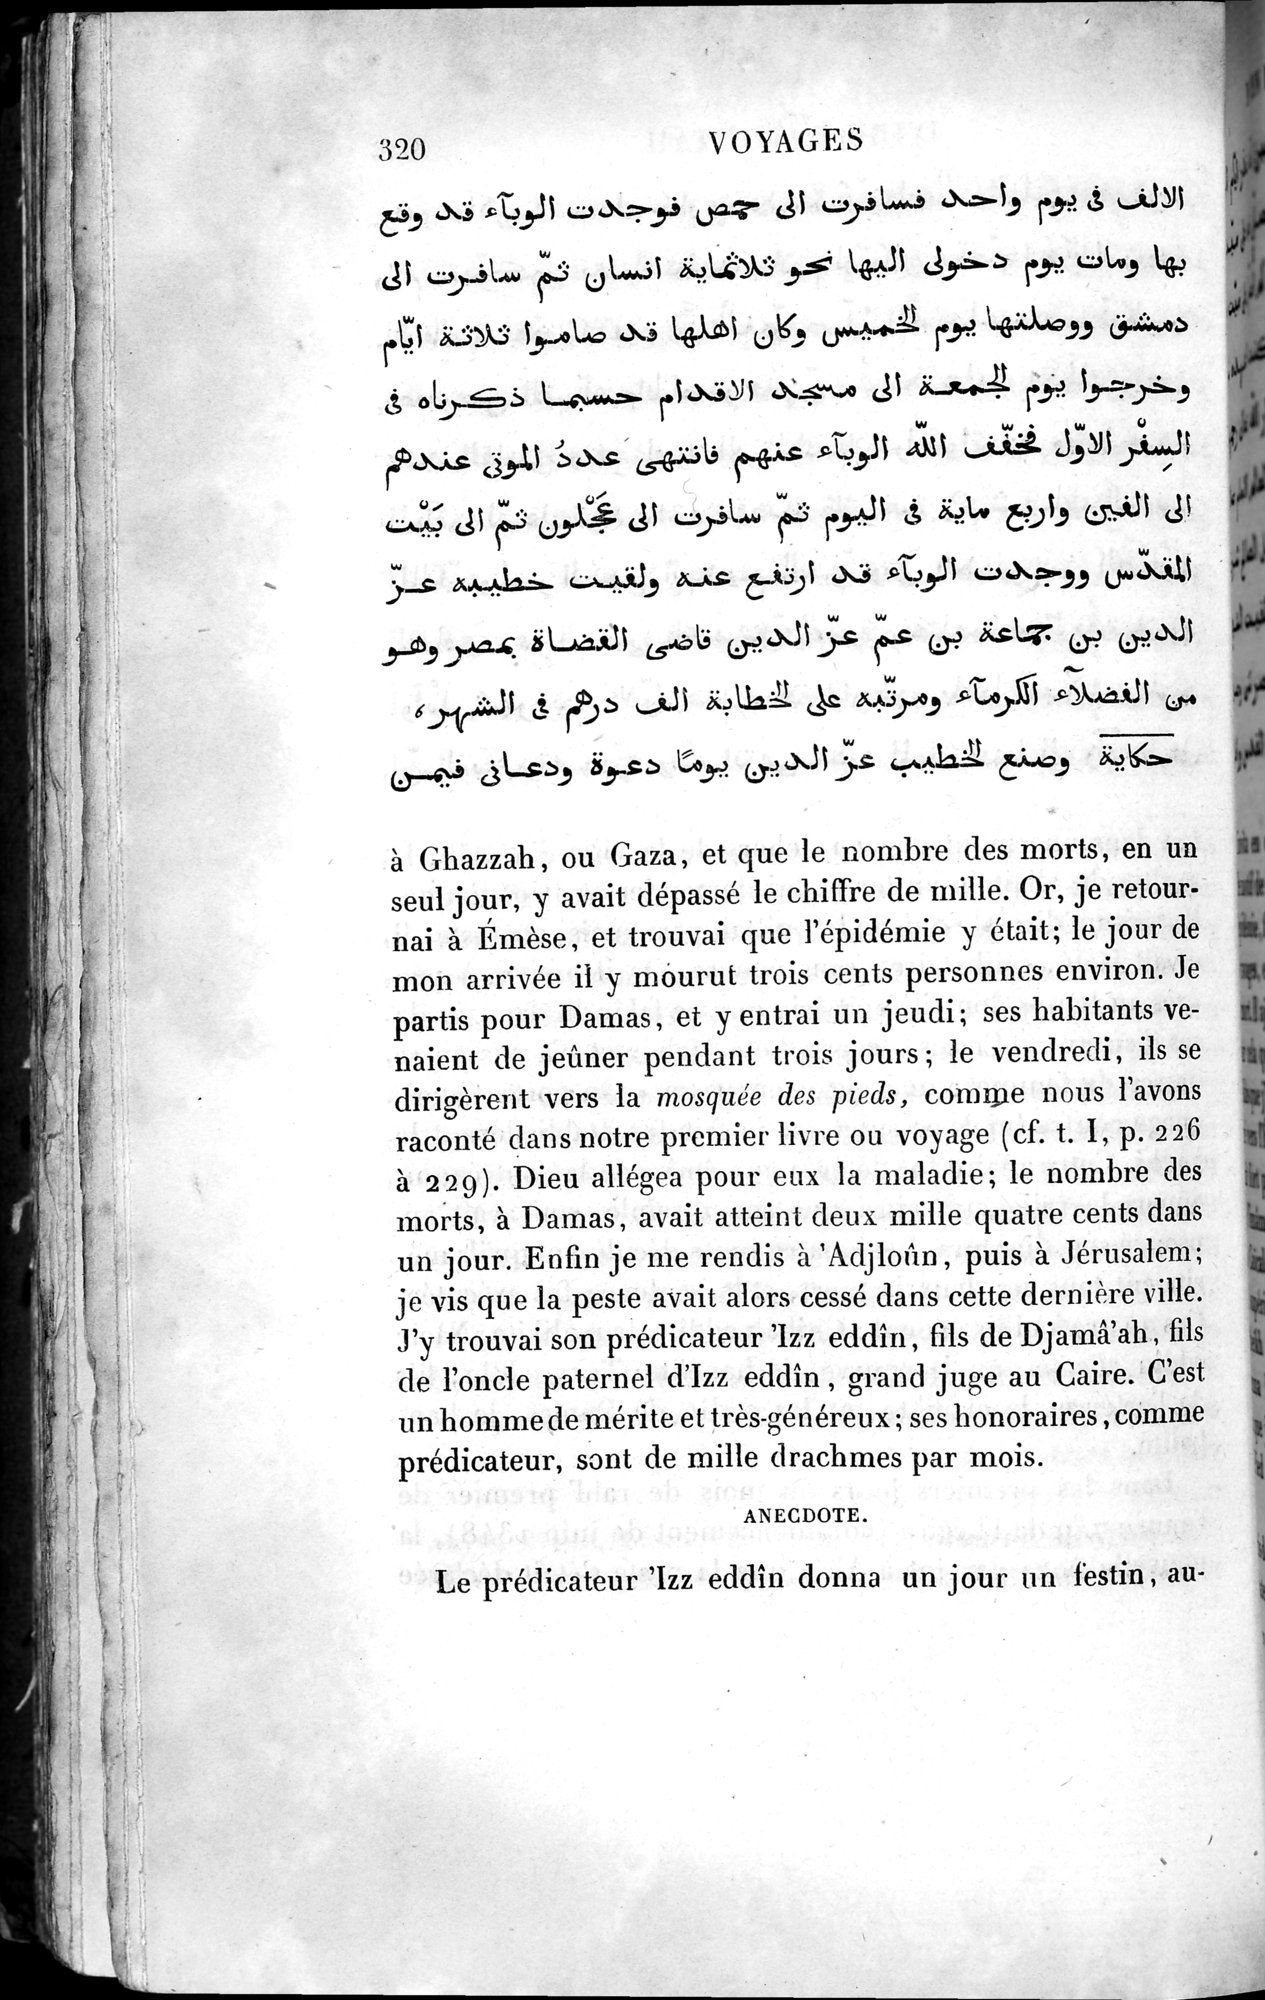 Voyages d'Ibn Batoutah : vol.4 / Page 332 (Grayscale High Resolution Image)